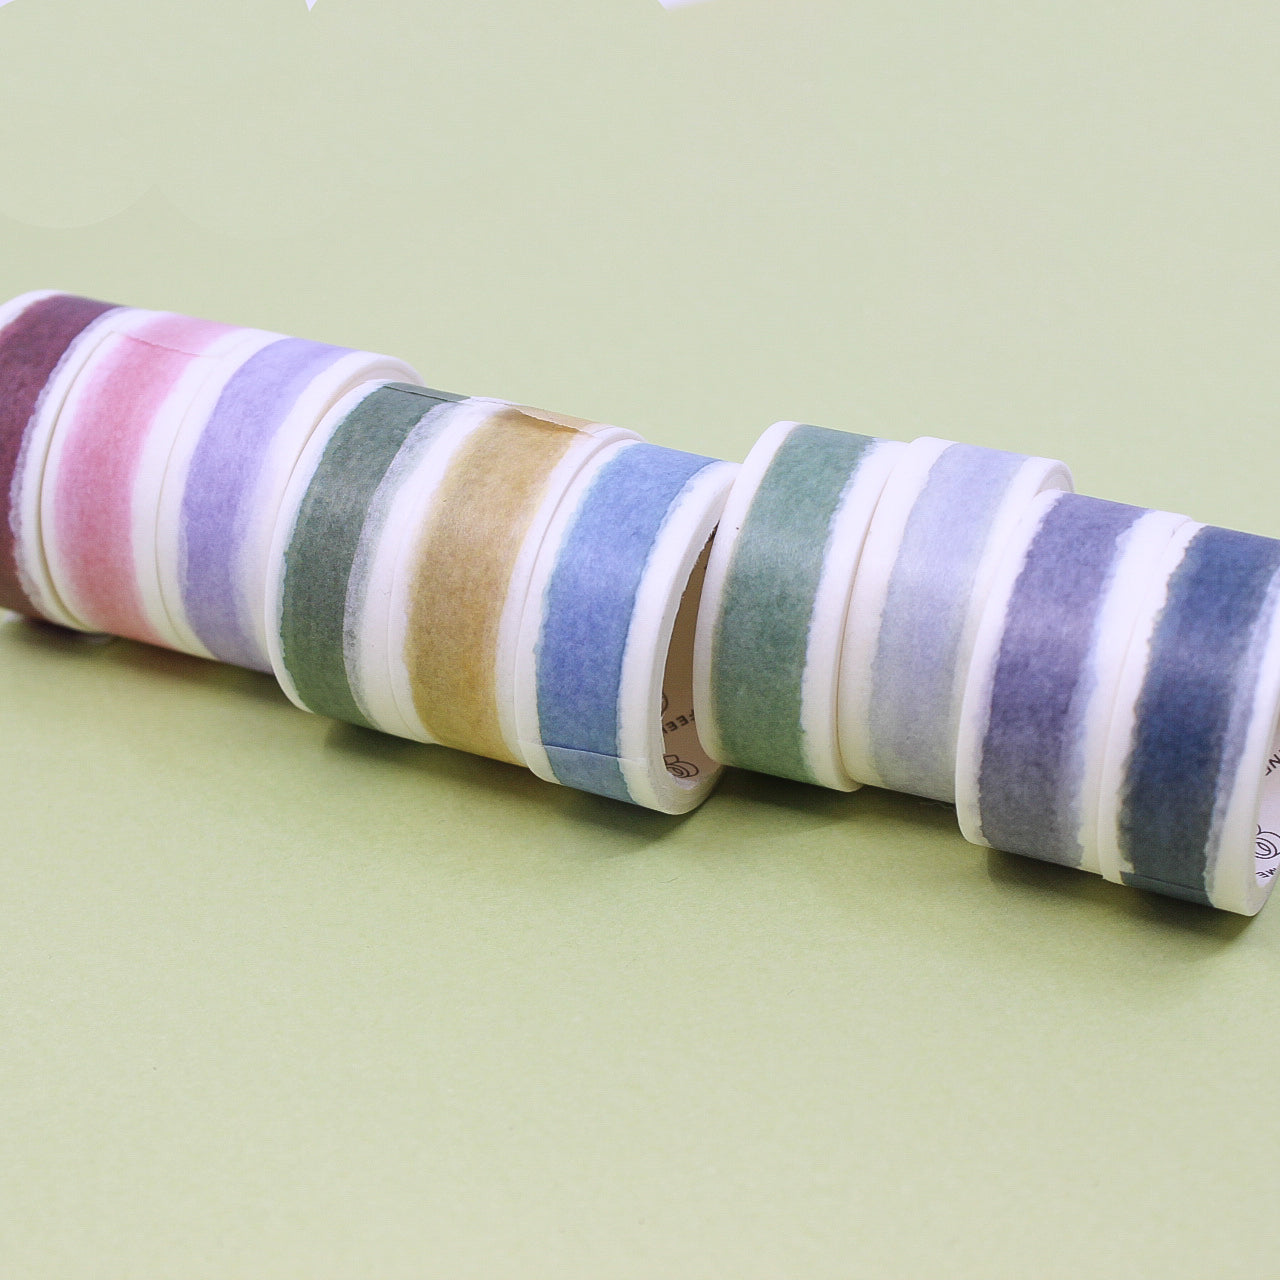 Get creative with our collection of 10 watercolor washi tapes in a beautiful rainbow palette, ideal for scrapbooking, journaling, and DIY crafts. These are especially perfect for easy banners on your spread. This collection is sold at BBB Supplies Craft Shop.